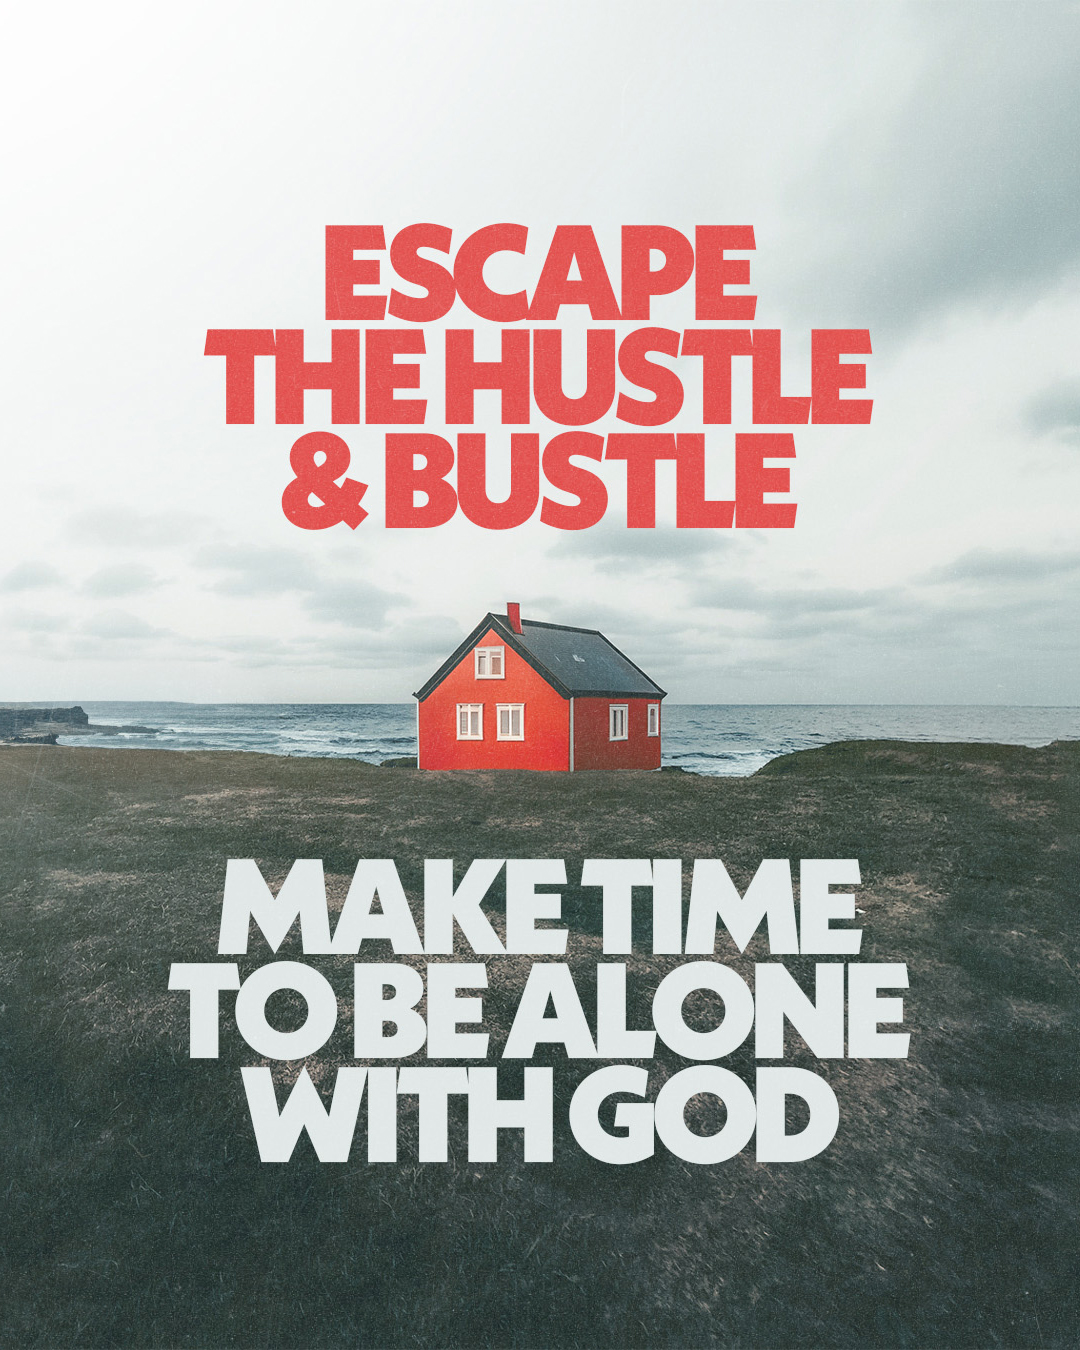 Escape the hustle & bustle make time to be alone with God